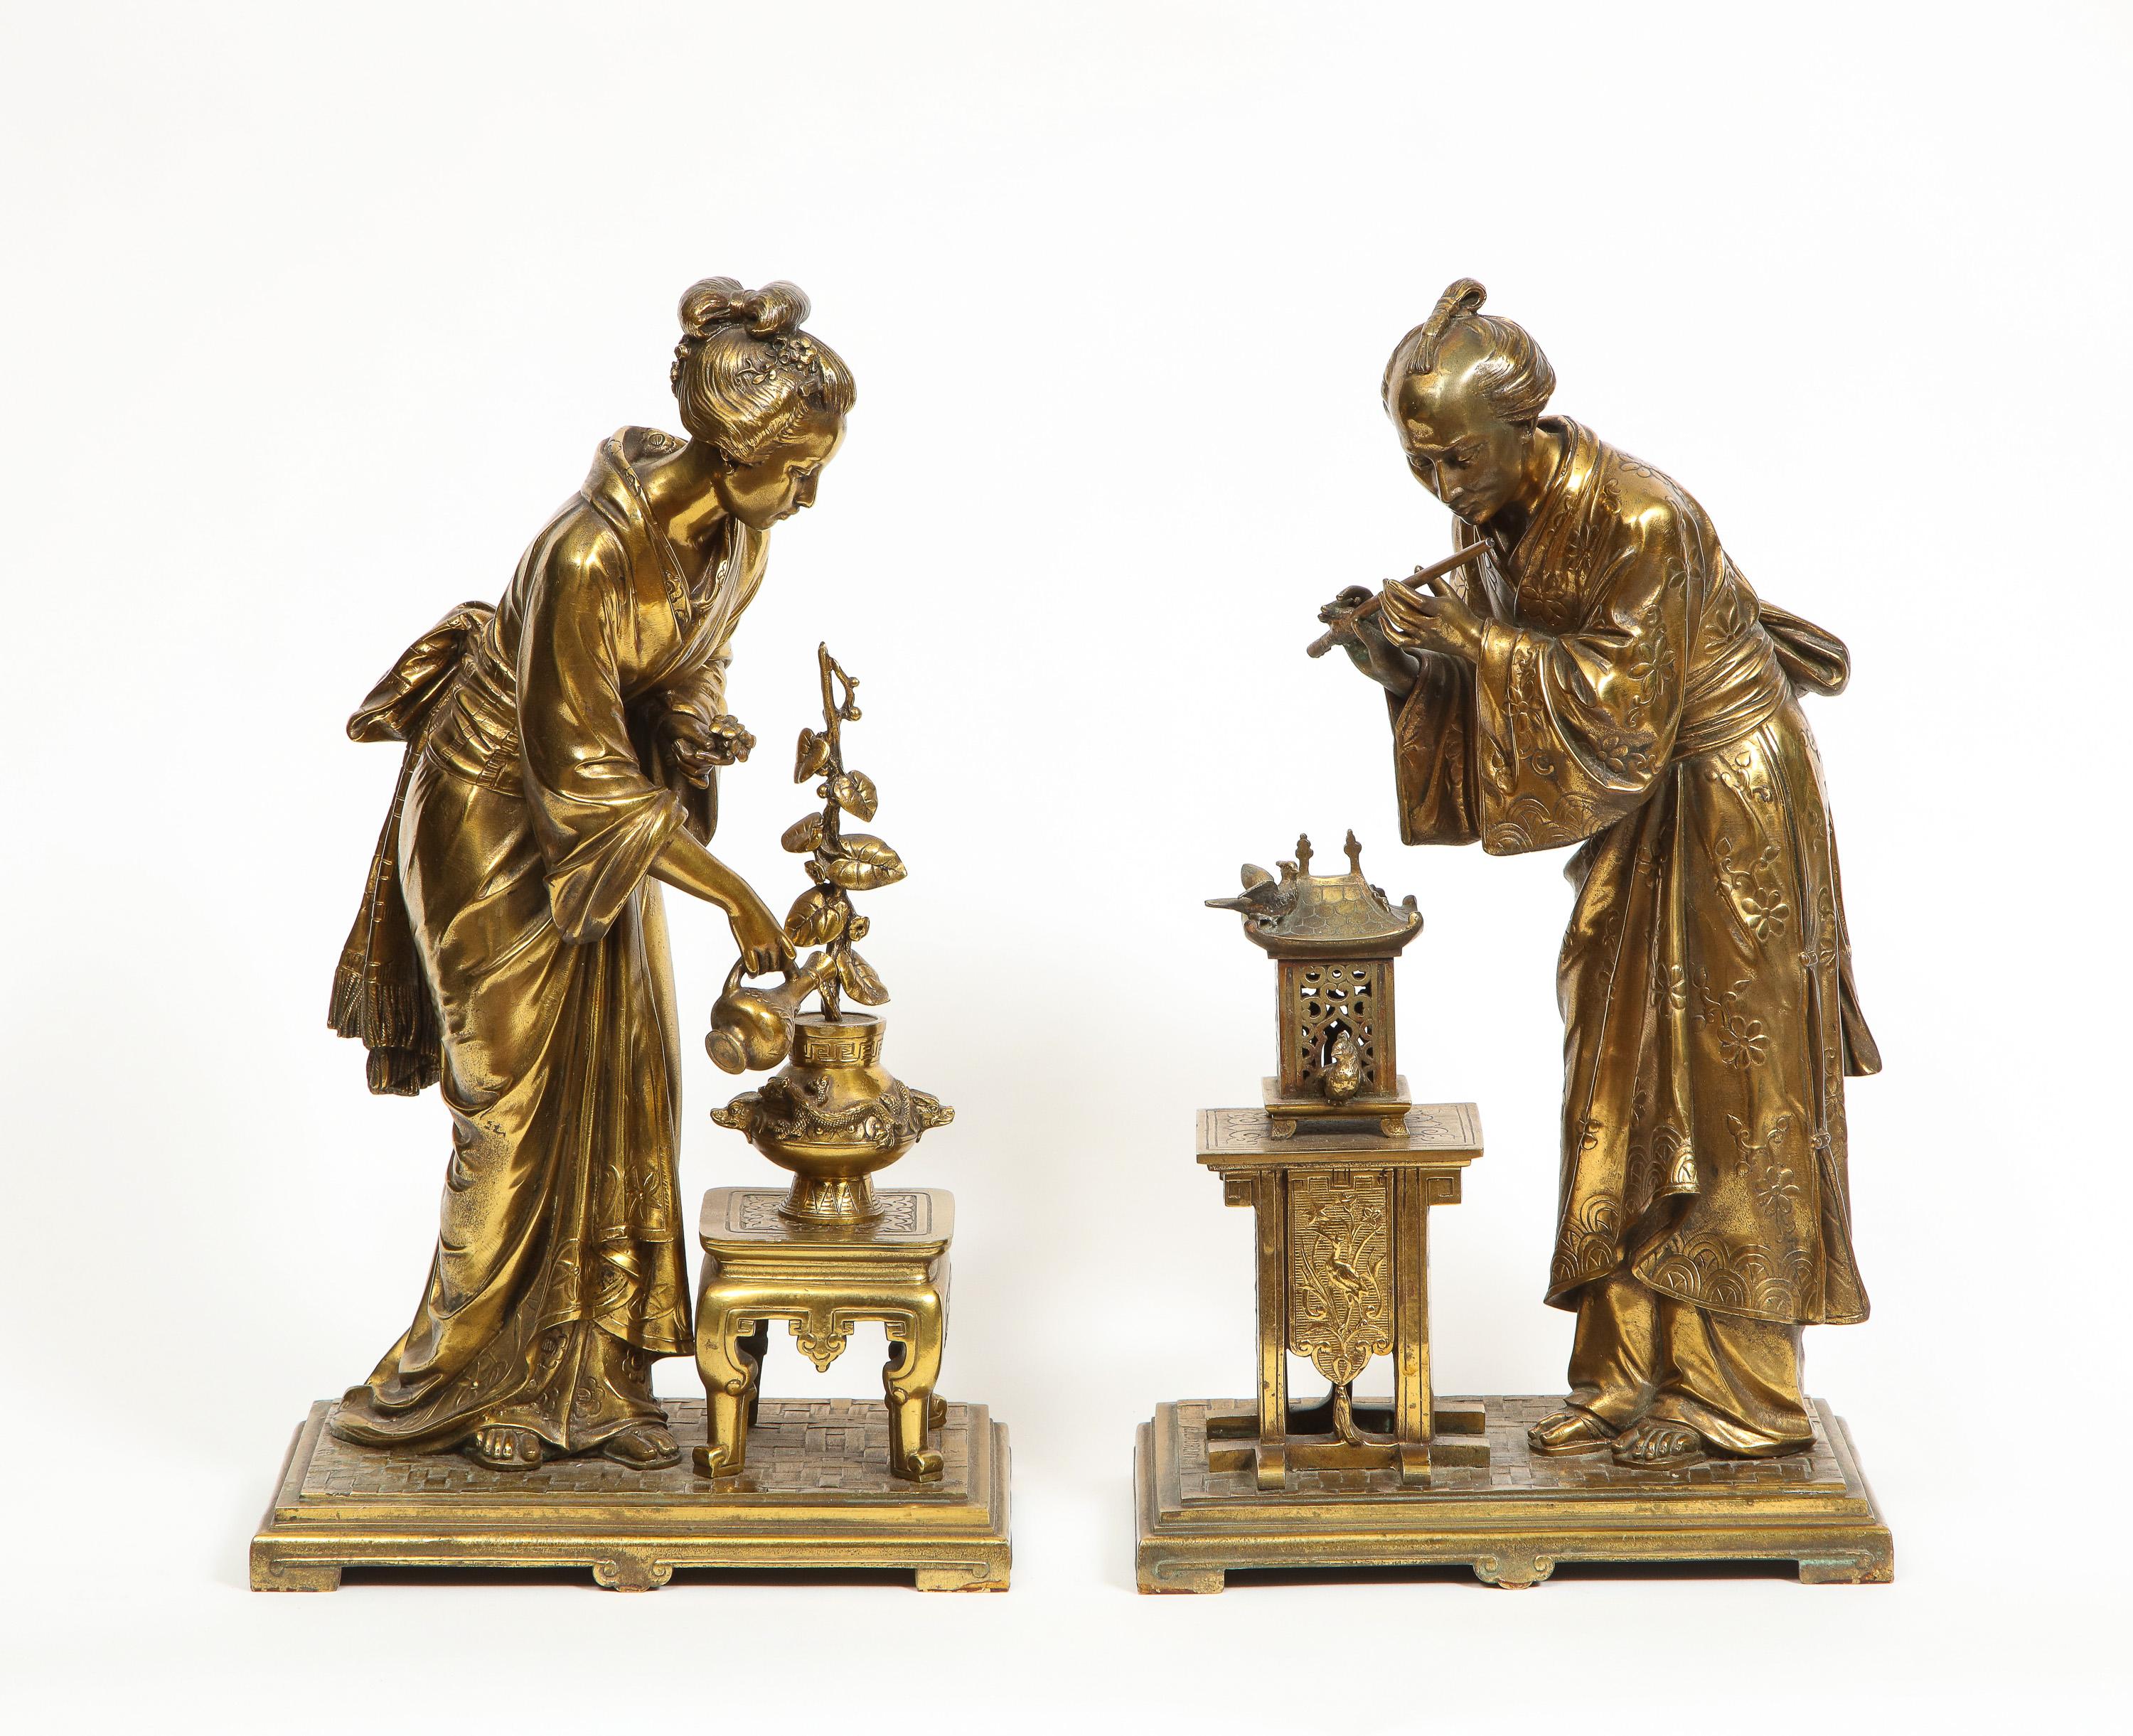 A Rare Pair of French Japonisme Bronze Sculptures by Eugene Laurent, circa 1870 1